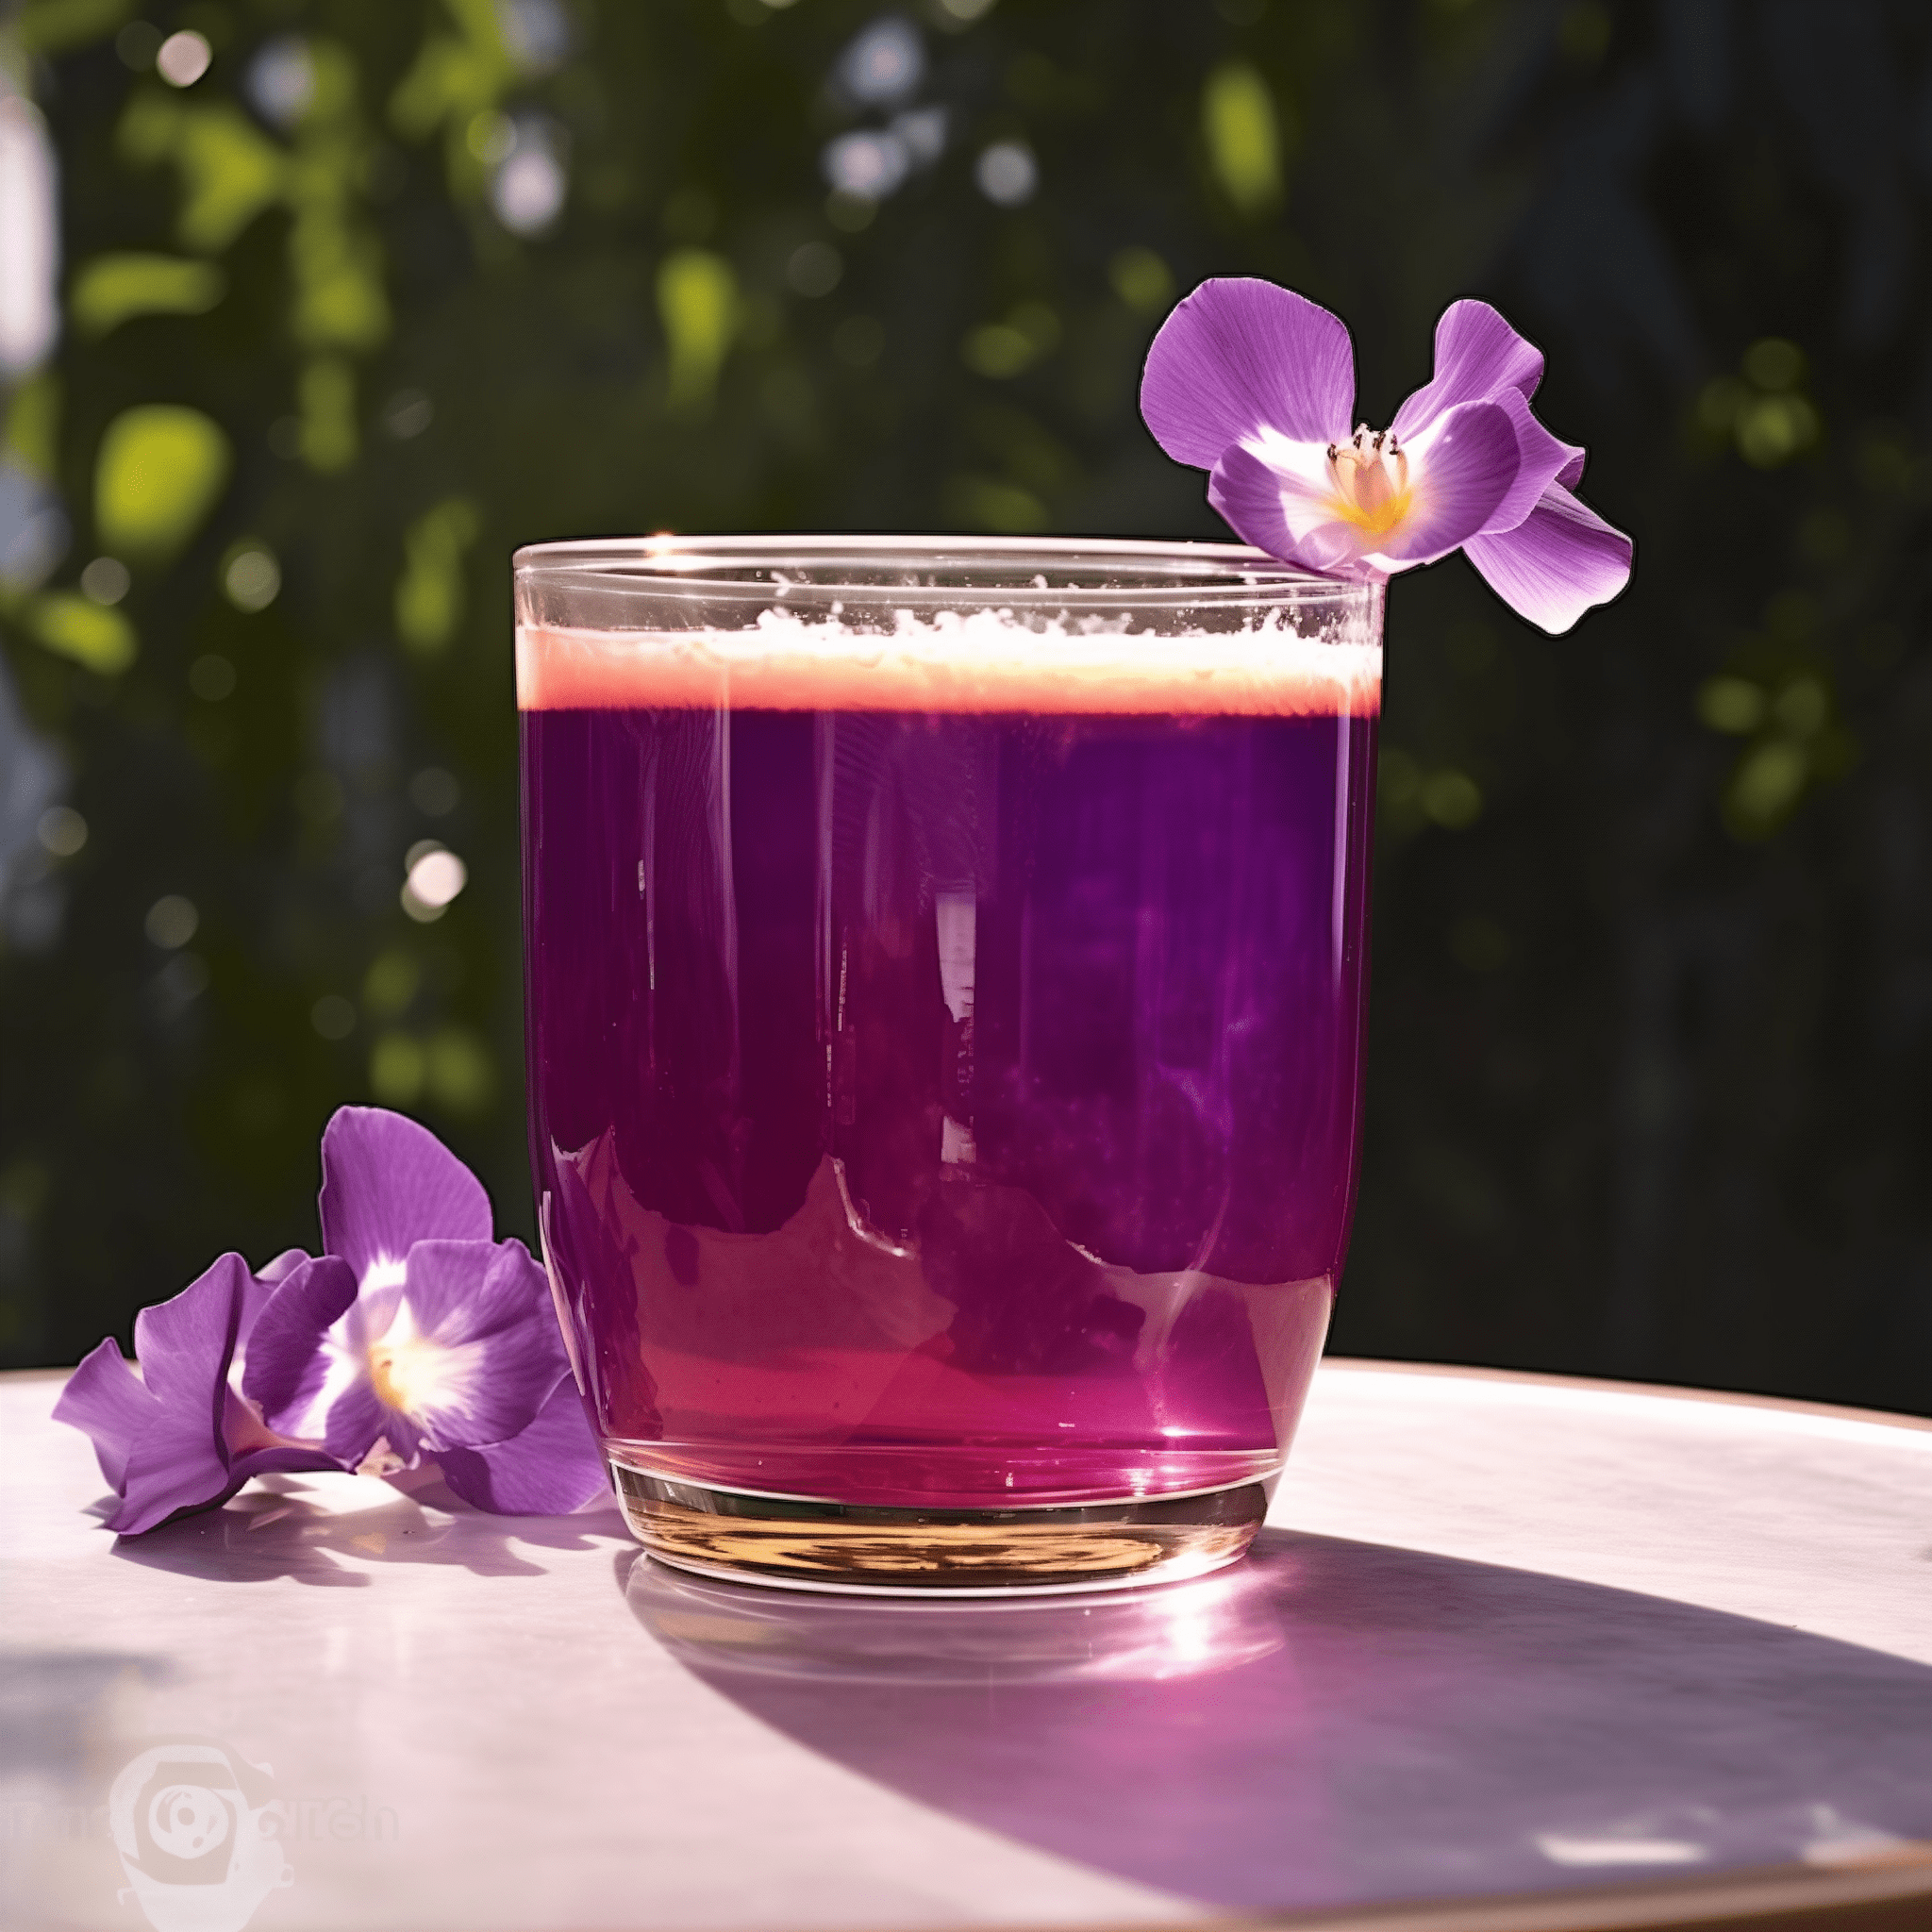 Viola Cocktail Recipe - The Viola cocktail is a symphony of flavors, starting with the sweet and floral violet syrup at the base, followed by the zesty and slightly tangy lemon bitters, and topped with the rich, smooth, and slightly smoky notes of bourbon. It's a complex drink that balances sweetness with the warmth of the bourbon.